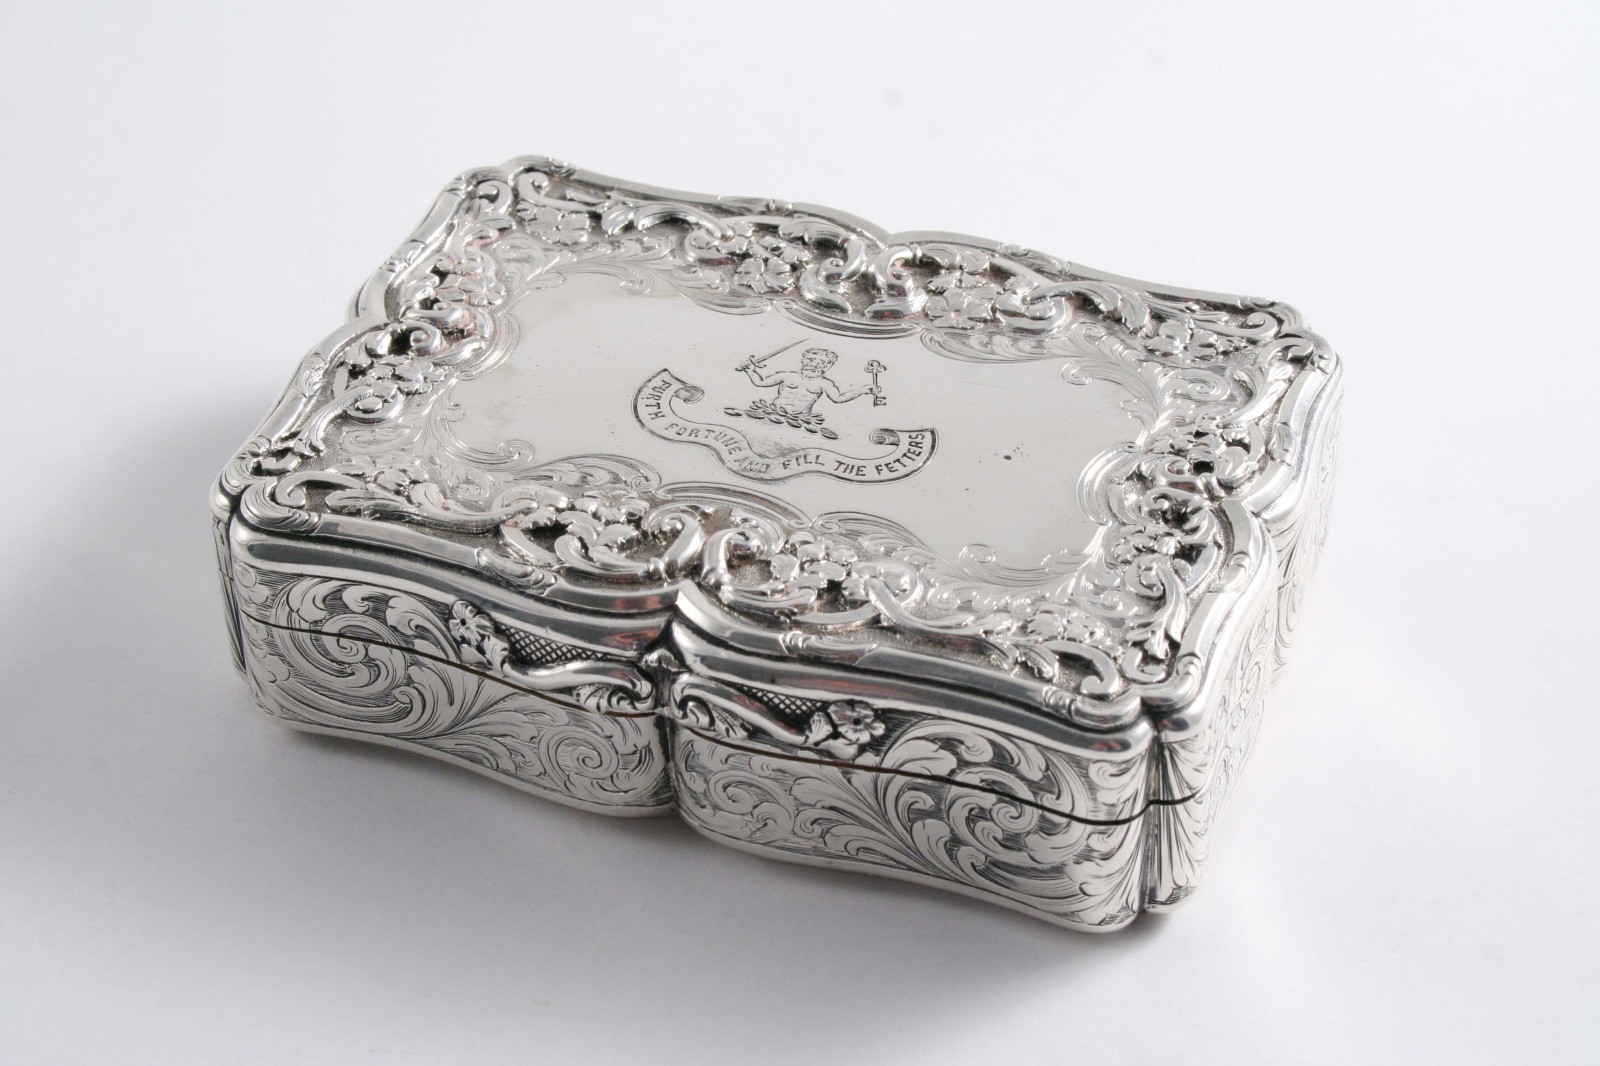 A VICTORIAN LARGE SNUFF BOX of oblong serpentine outline with floral scroll engraving, applied